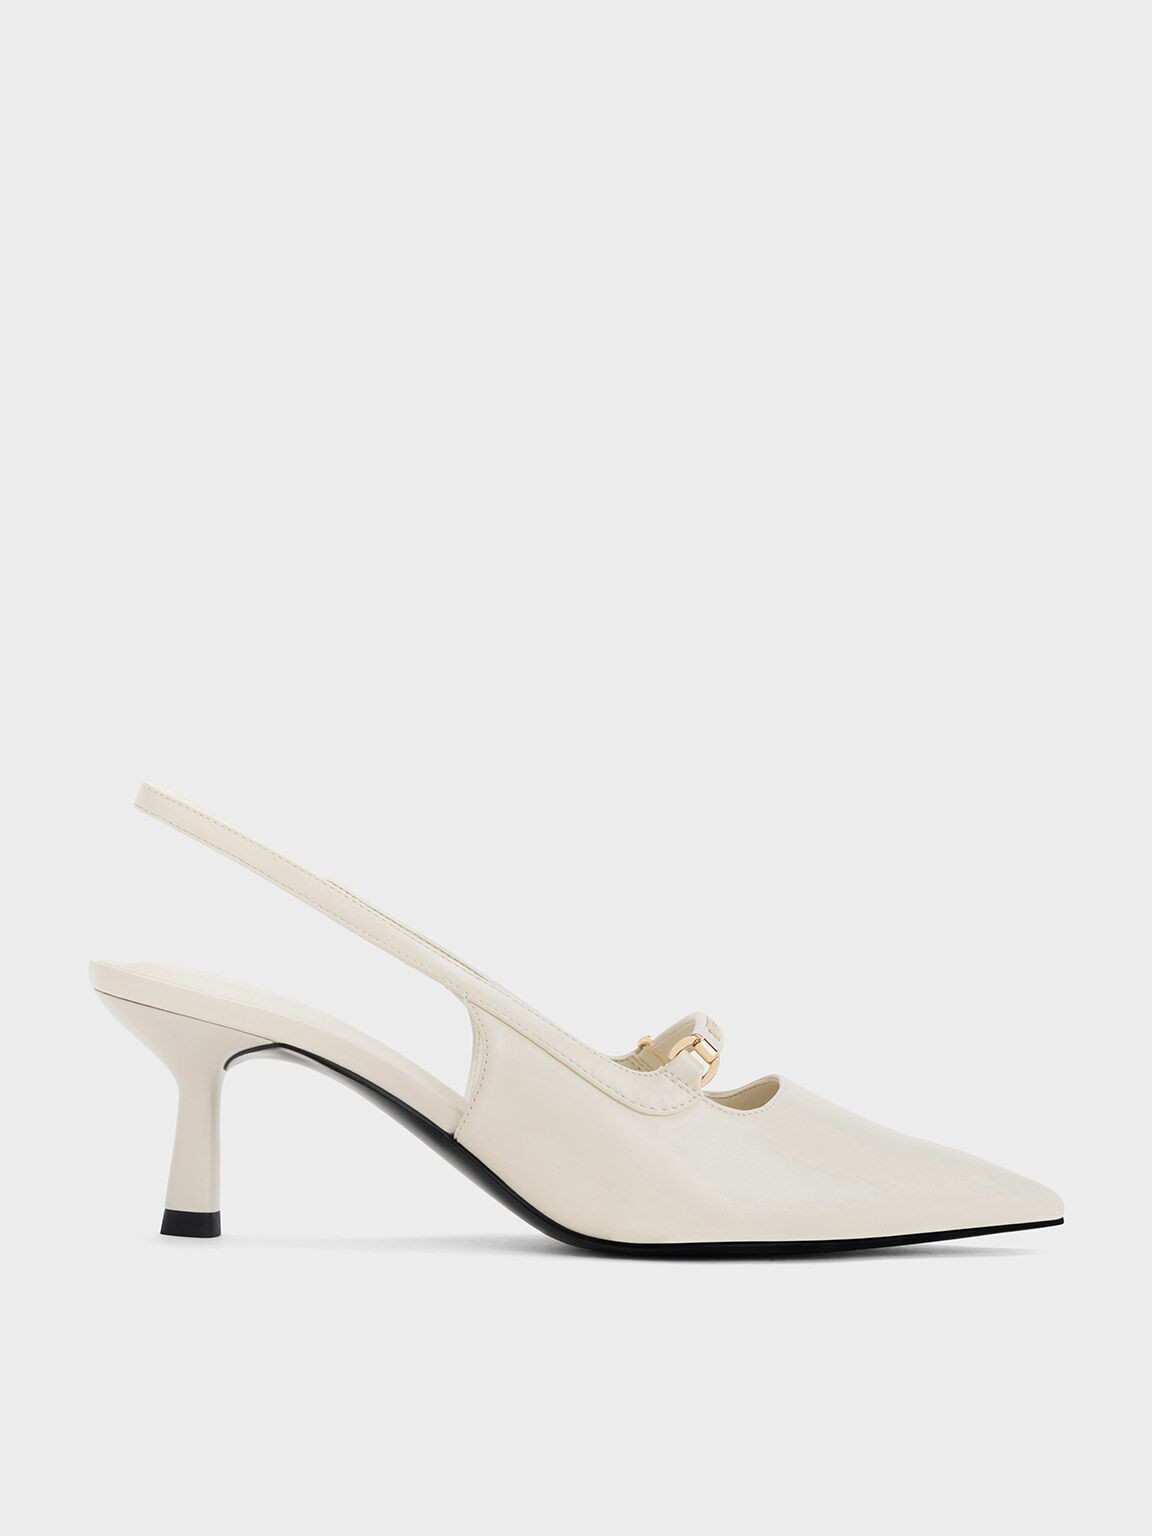 Décolleté with high heels for women in cream colored leather